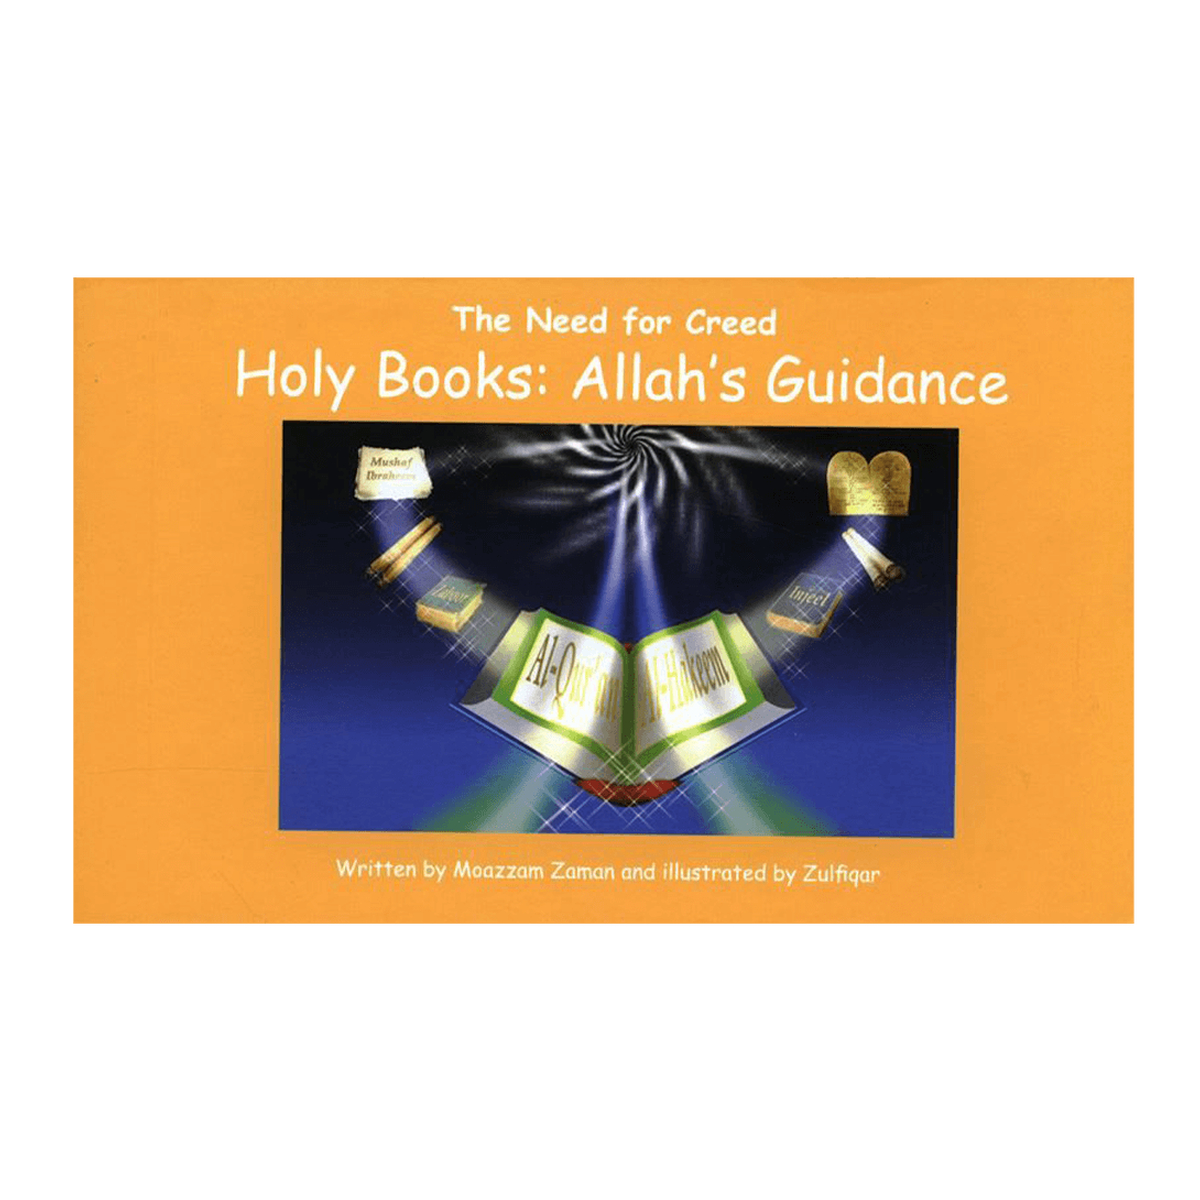 The need for Creed: Holy Books Allah's Guidance(4)